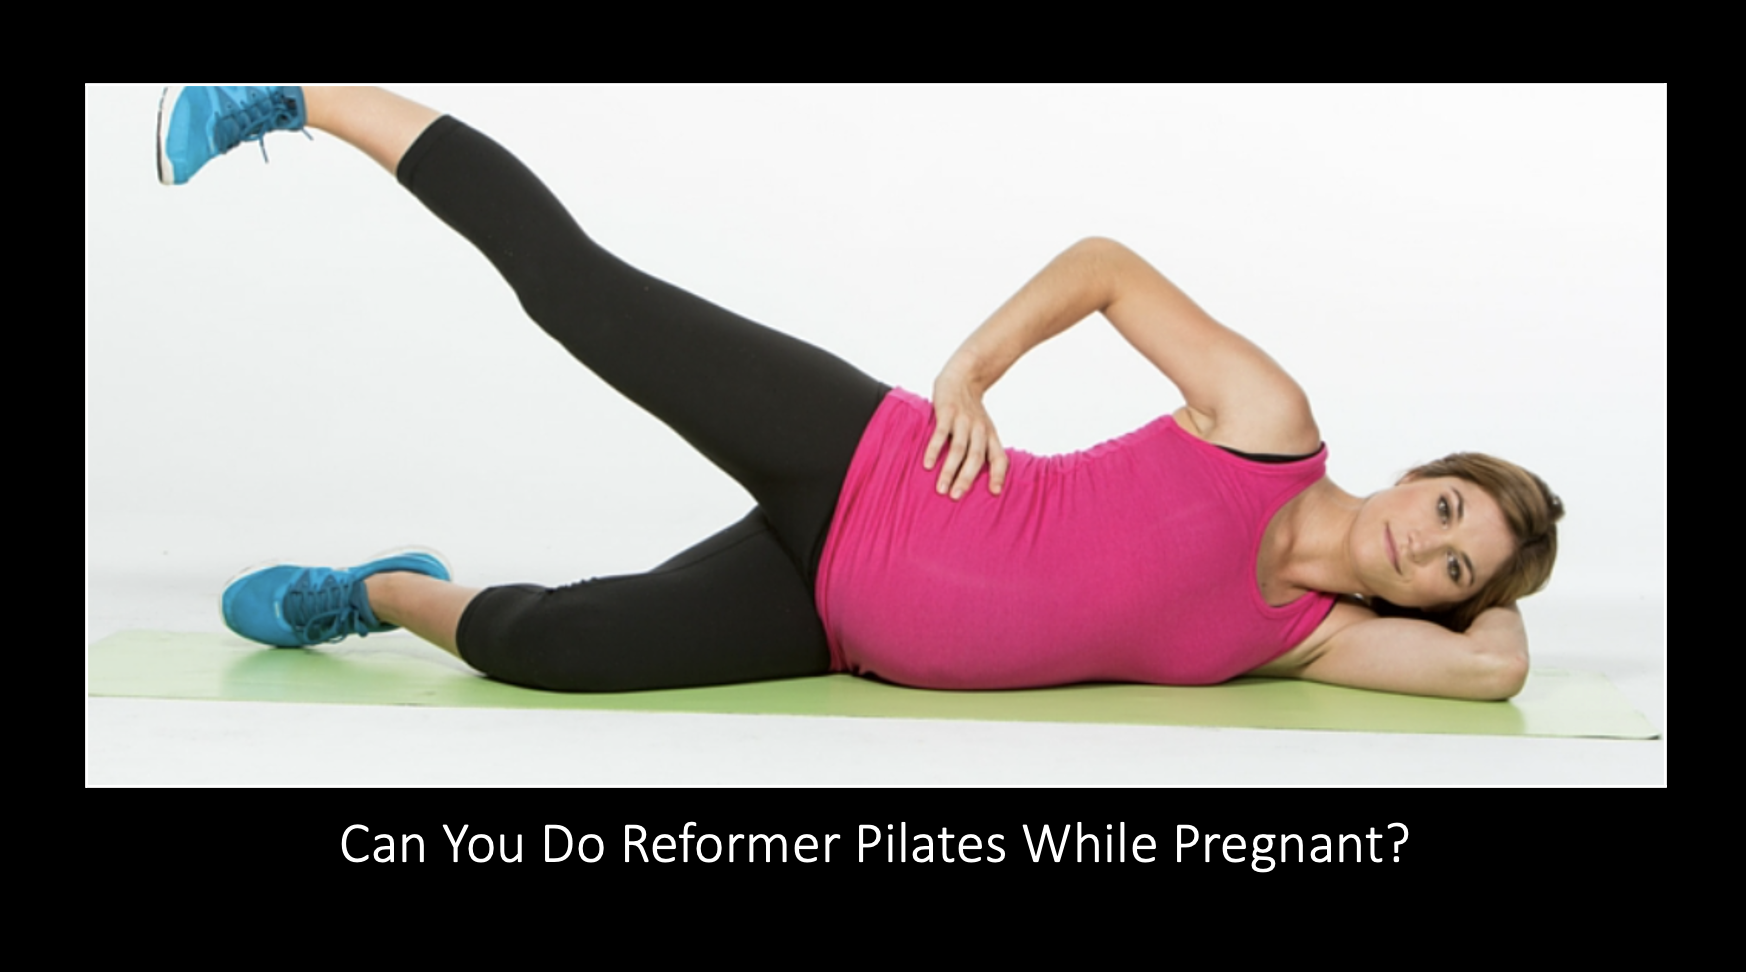 Can you do Reformer Pilates While Pregnant?